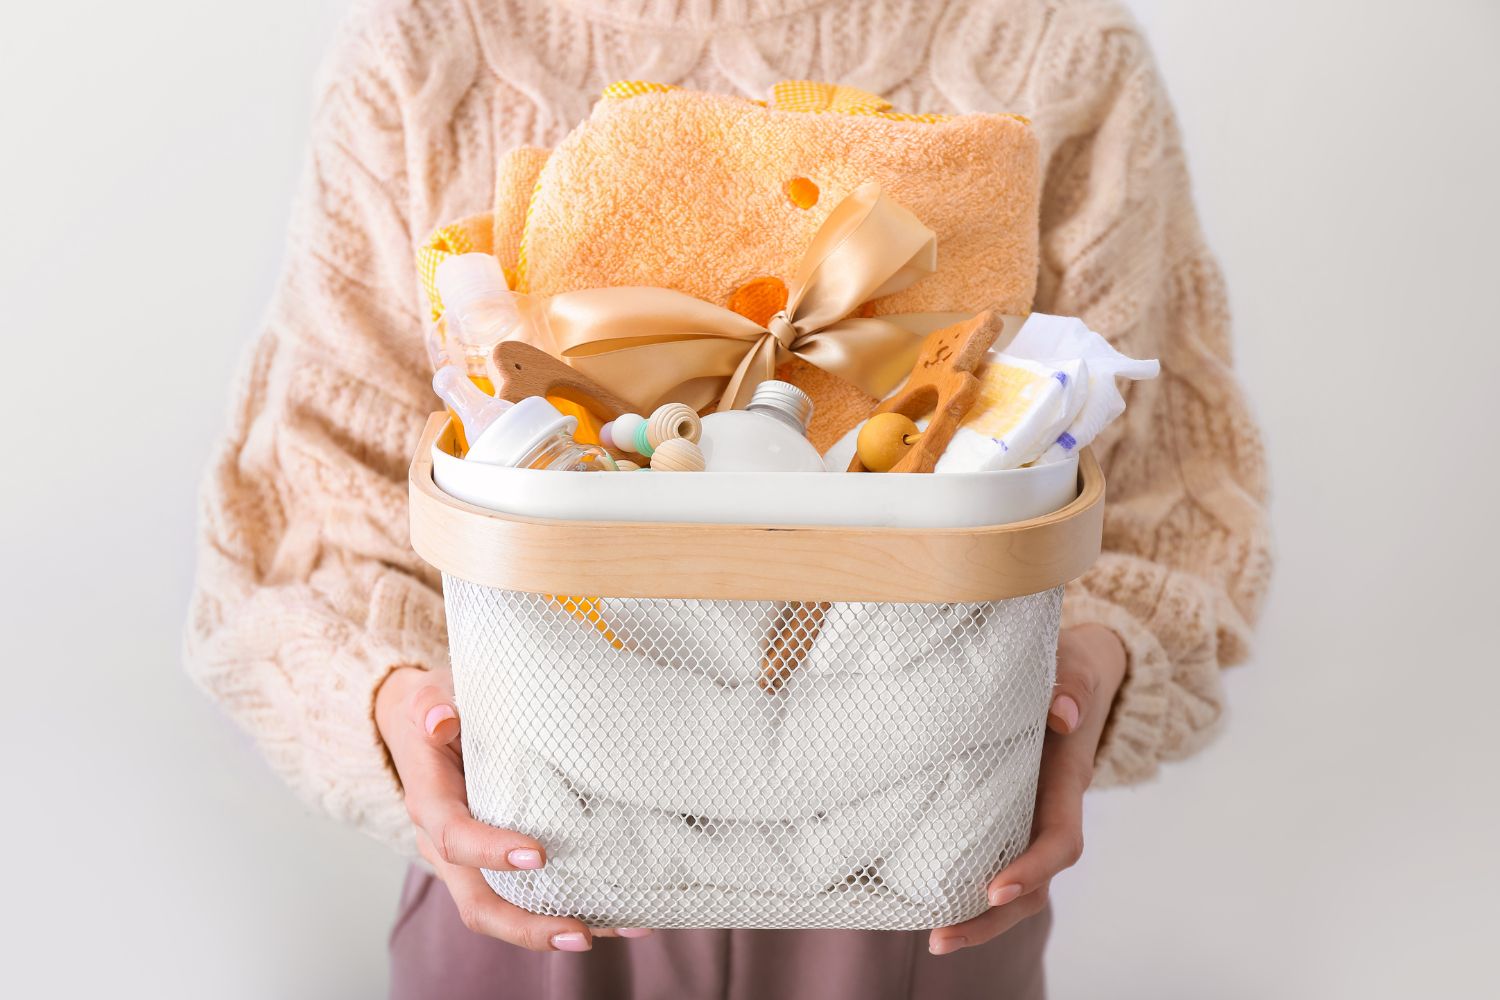 A woman holding a basket of gifts for a baby on white background